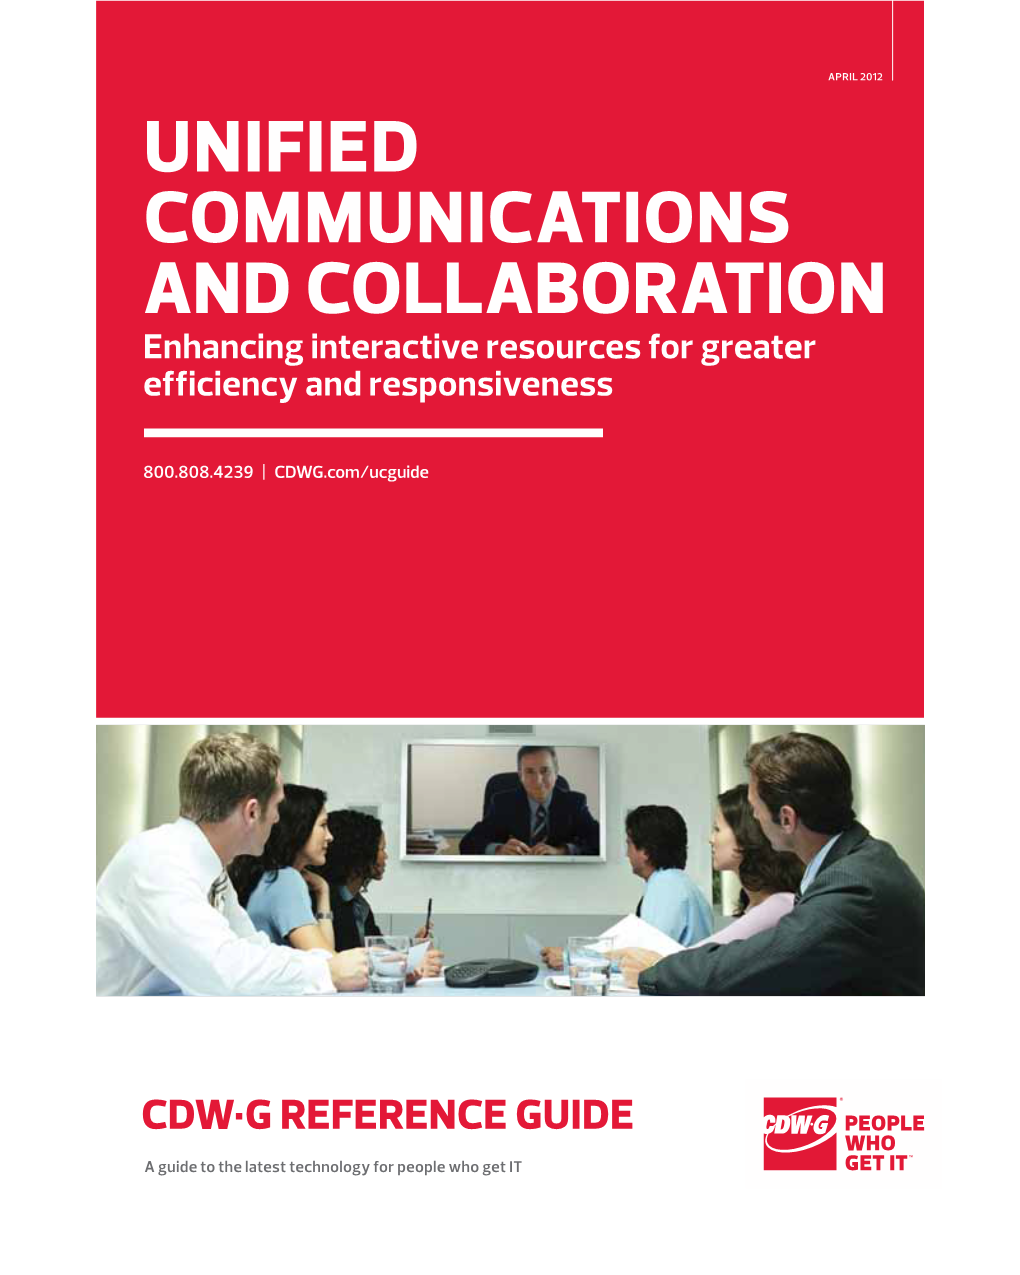 Unified Communications and Collaboration Reference Guide | April 2012